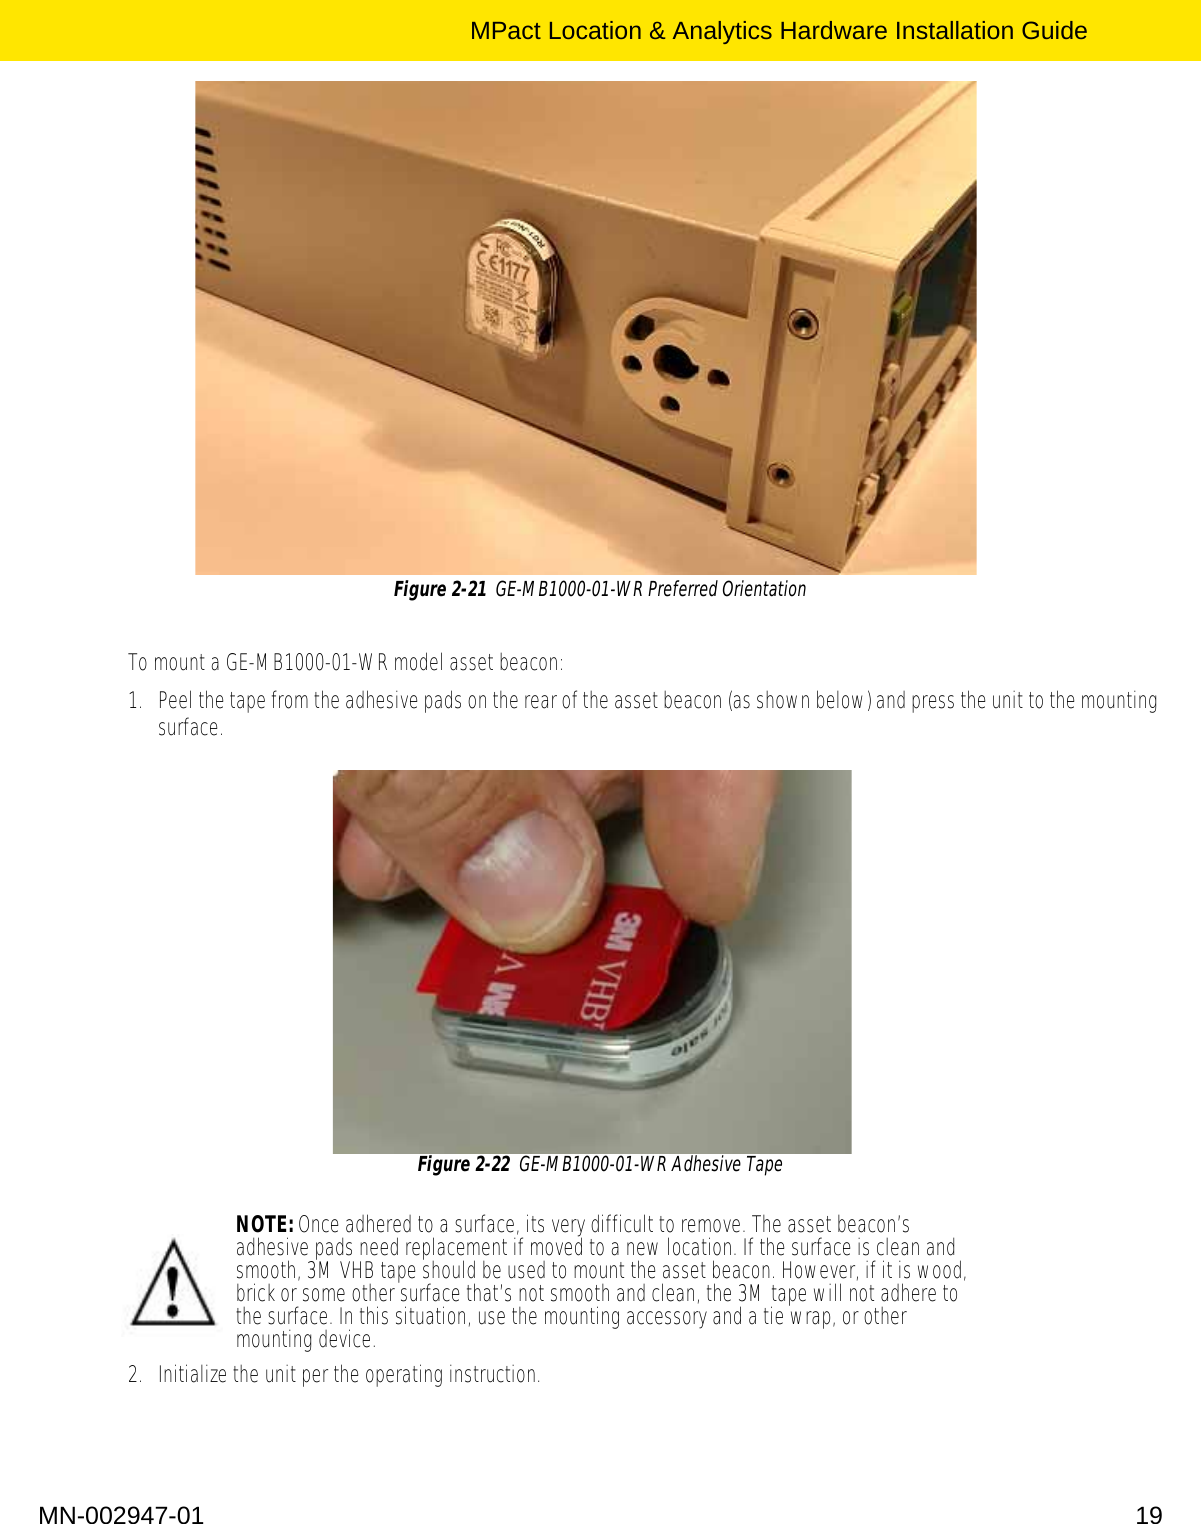 MPact Location &amp; Analytics Hardware Installation GuideMN-002947-01 19Figure 2-21  GE-MB1000-01-WR Preferred Orientation To mount a GE-MB1000-01-WR model asset beacon:1. Peel the tape from the adhesive pads on the rear of the asset beacon (as shown below) and press the unit to the mounting surface. Figure 2-22  GE-MB1000-01-WR Adhesive Tape 2. Initialize the unit per the operating instruction.NOTE: Once adhered to a surface, its very difficult to remove. The asset beacon’s adhesive pads need replacement if moved to a new location. If the surface is clean and smooth, 3M VHB tape should be used to mount the asset beacon. However, if it is wood, brick or some other surface that’s not smooth and clean, the 3M tape will not adhere to the surface. In this situation, use the mounting accessory and a tie wrap, or other mounting device.